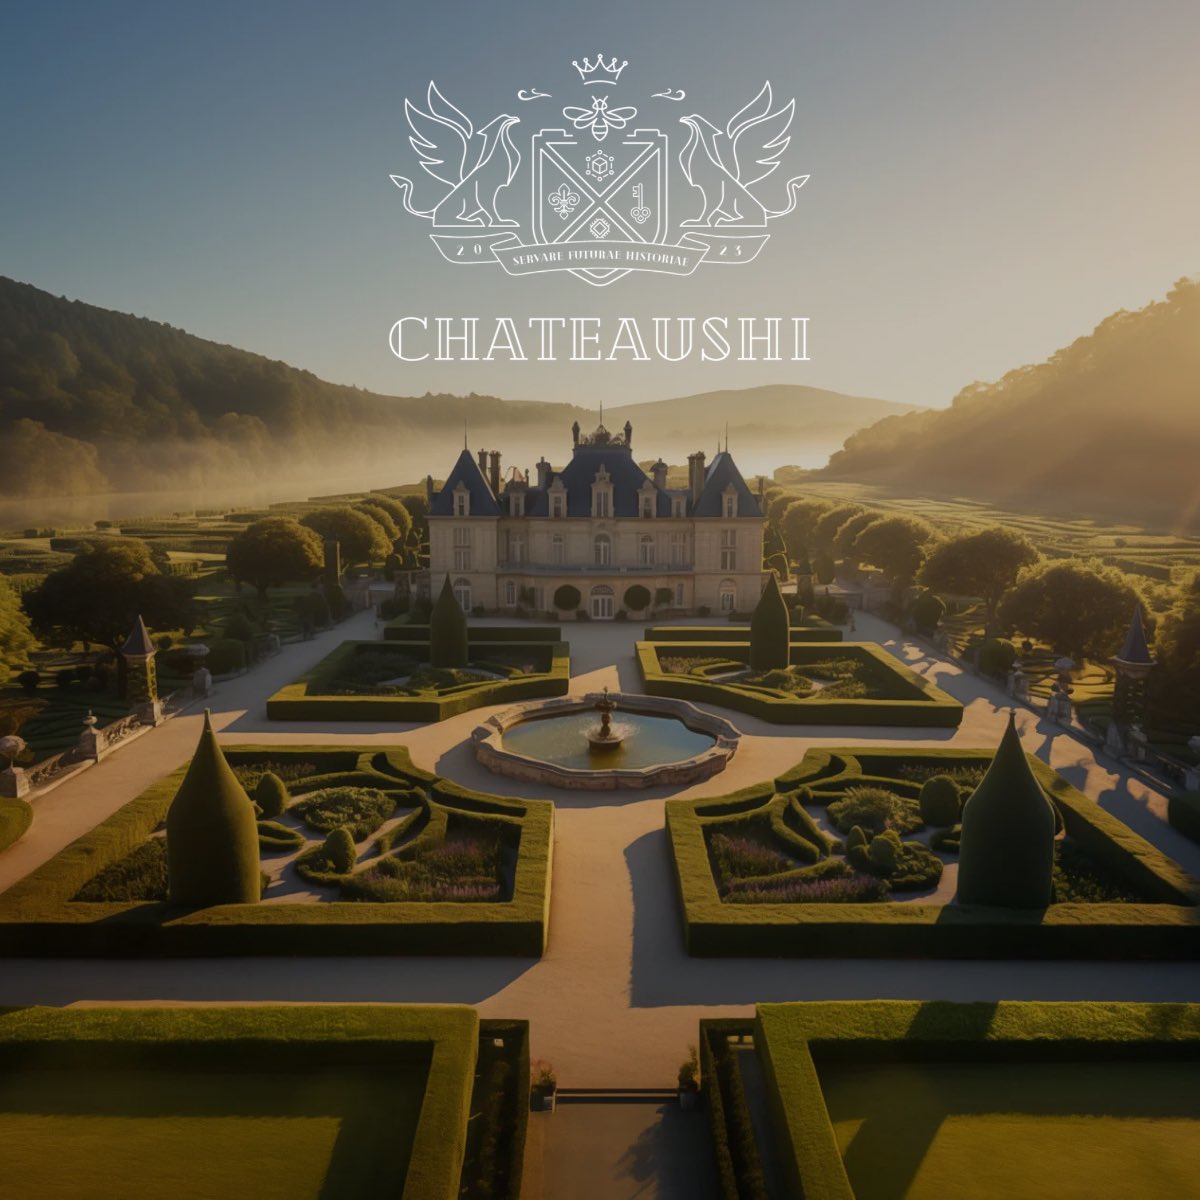 Introducing Chateaushi: a private member's club where members are equity shareholders in a community-owned, historic, real estate portfolio. Our mission is to leverage emerging technology and community to preserve our world heritage. Learn more at Chateaushi.com